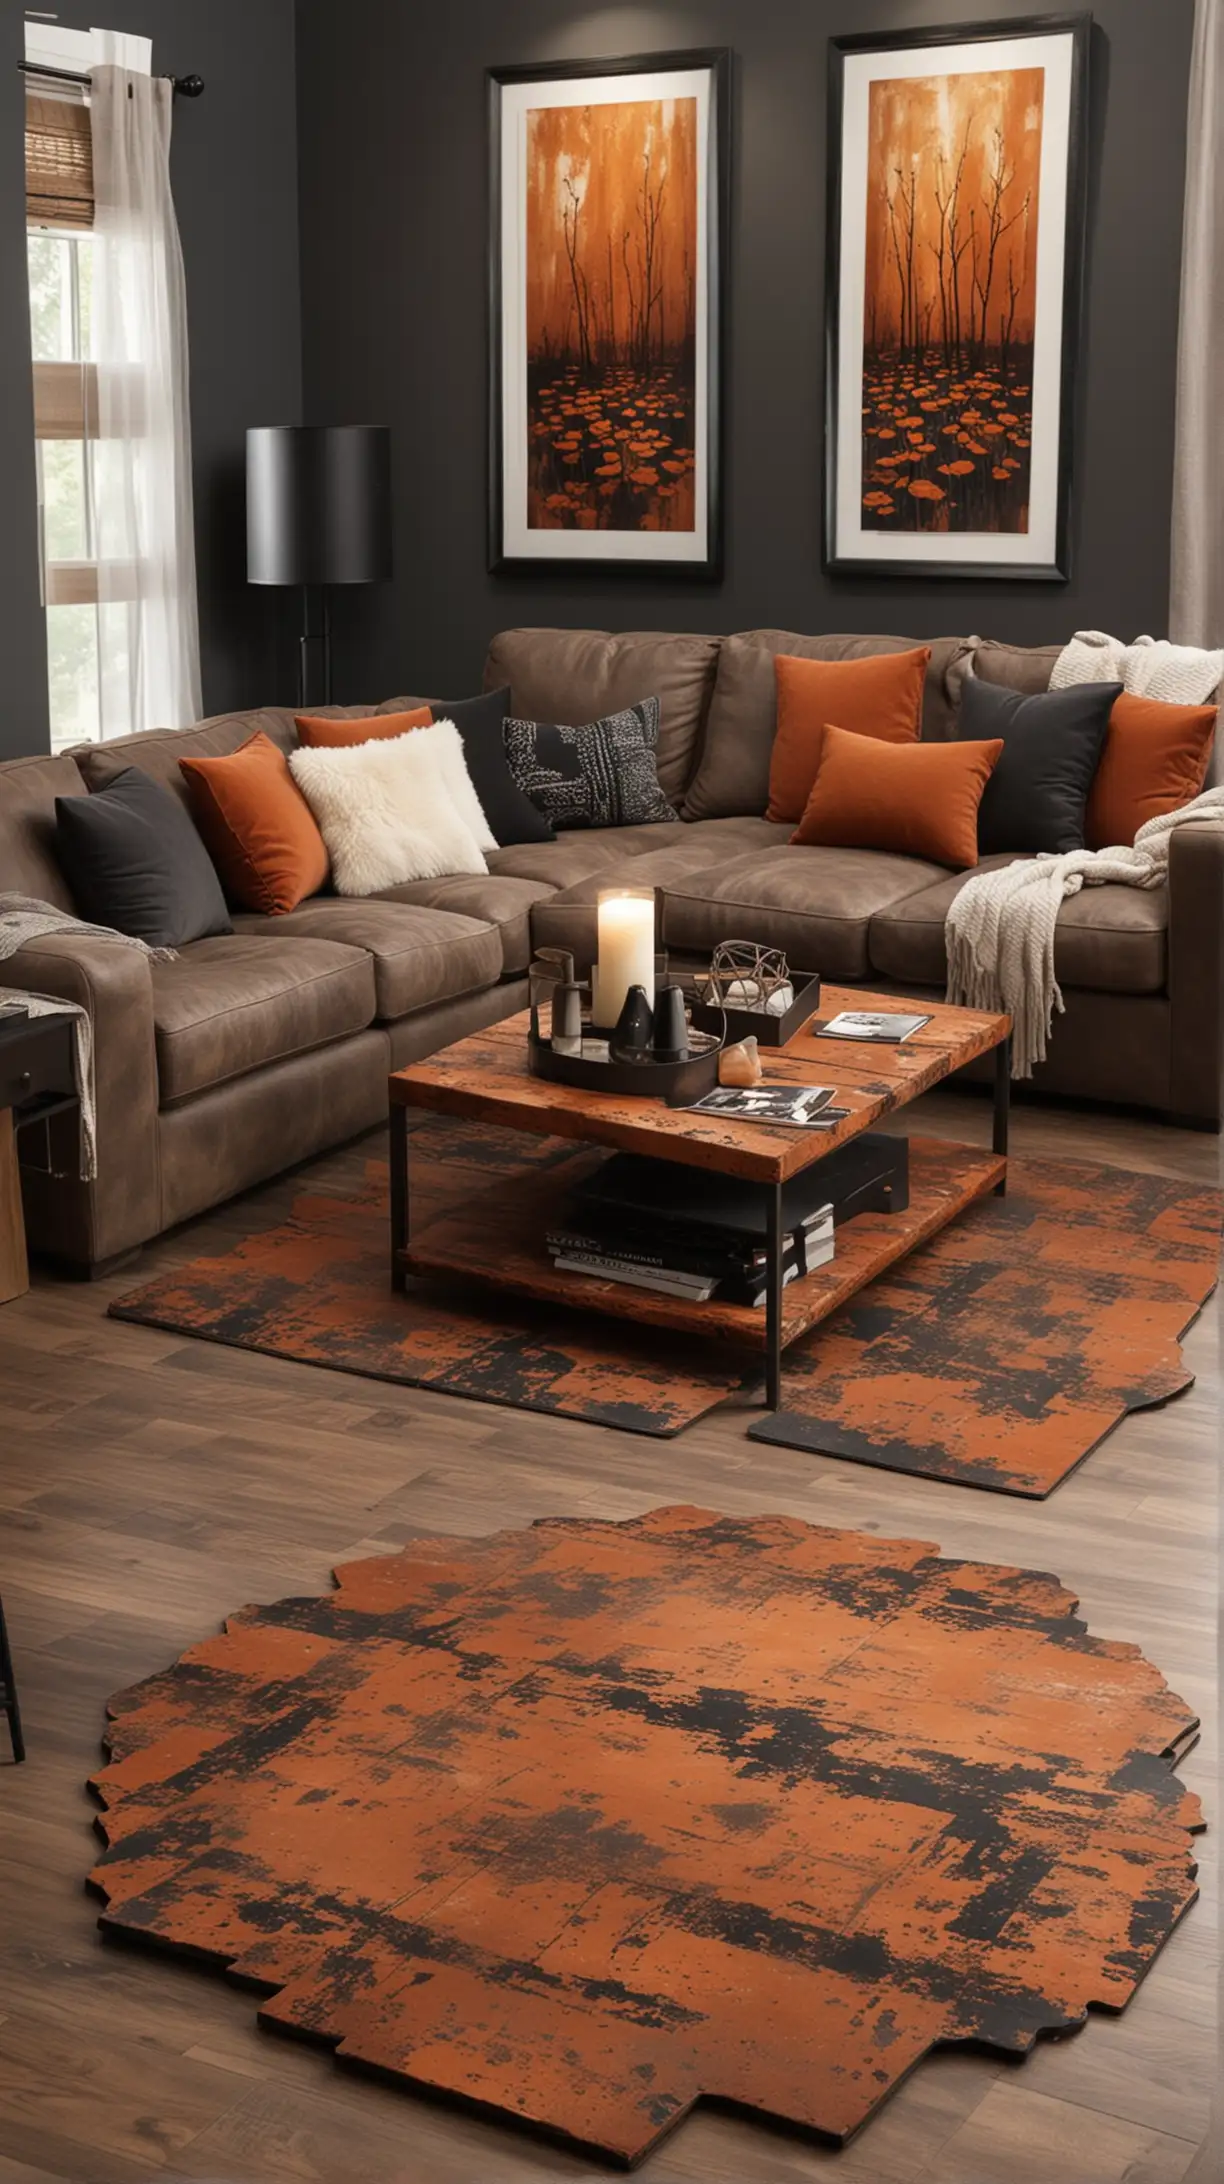 Black and Rust Theme Living Room with Coasters and Sofa